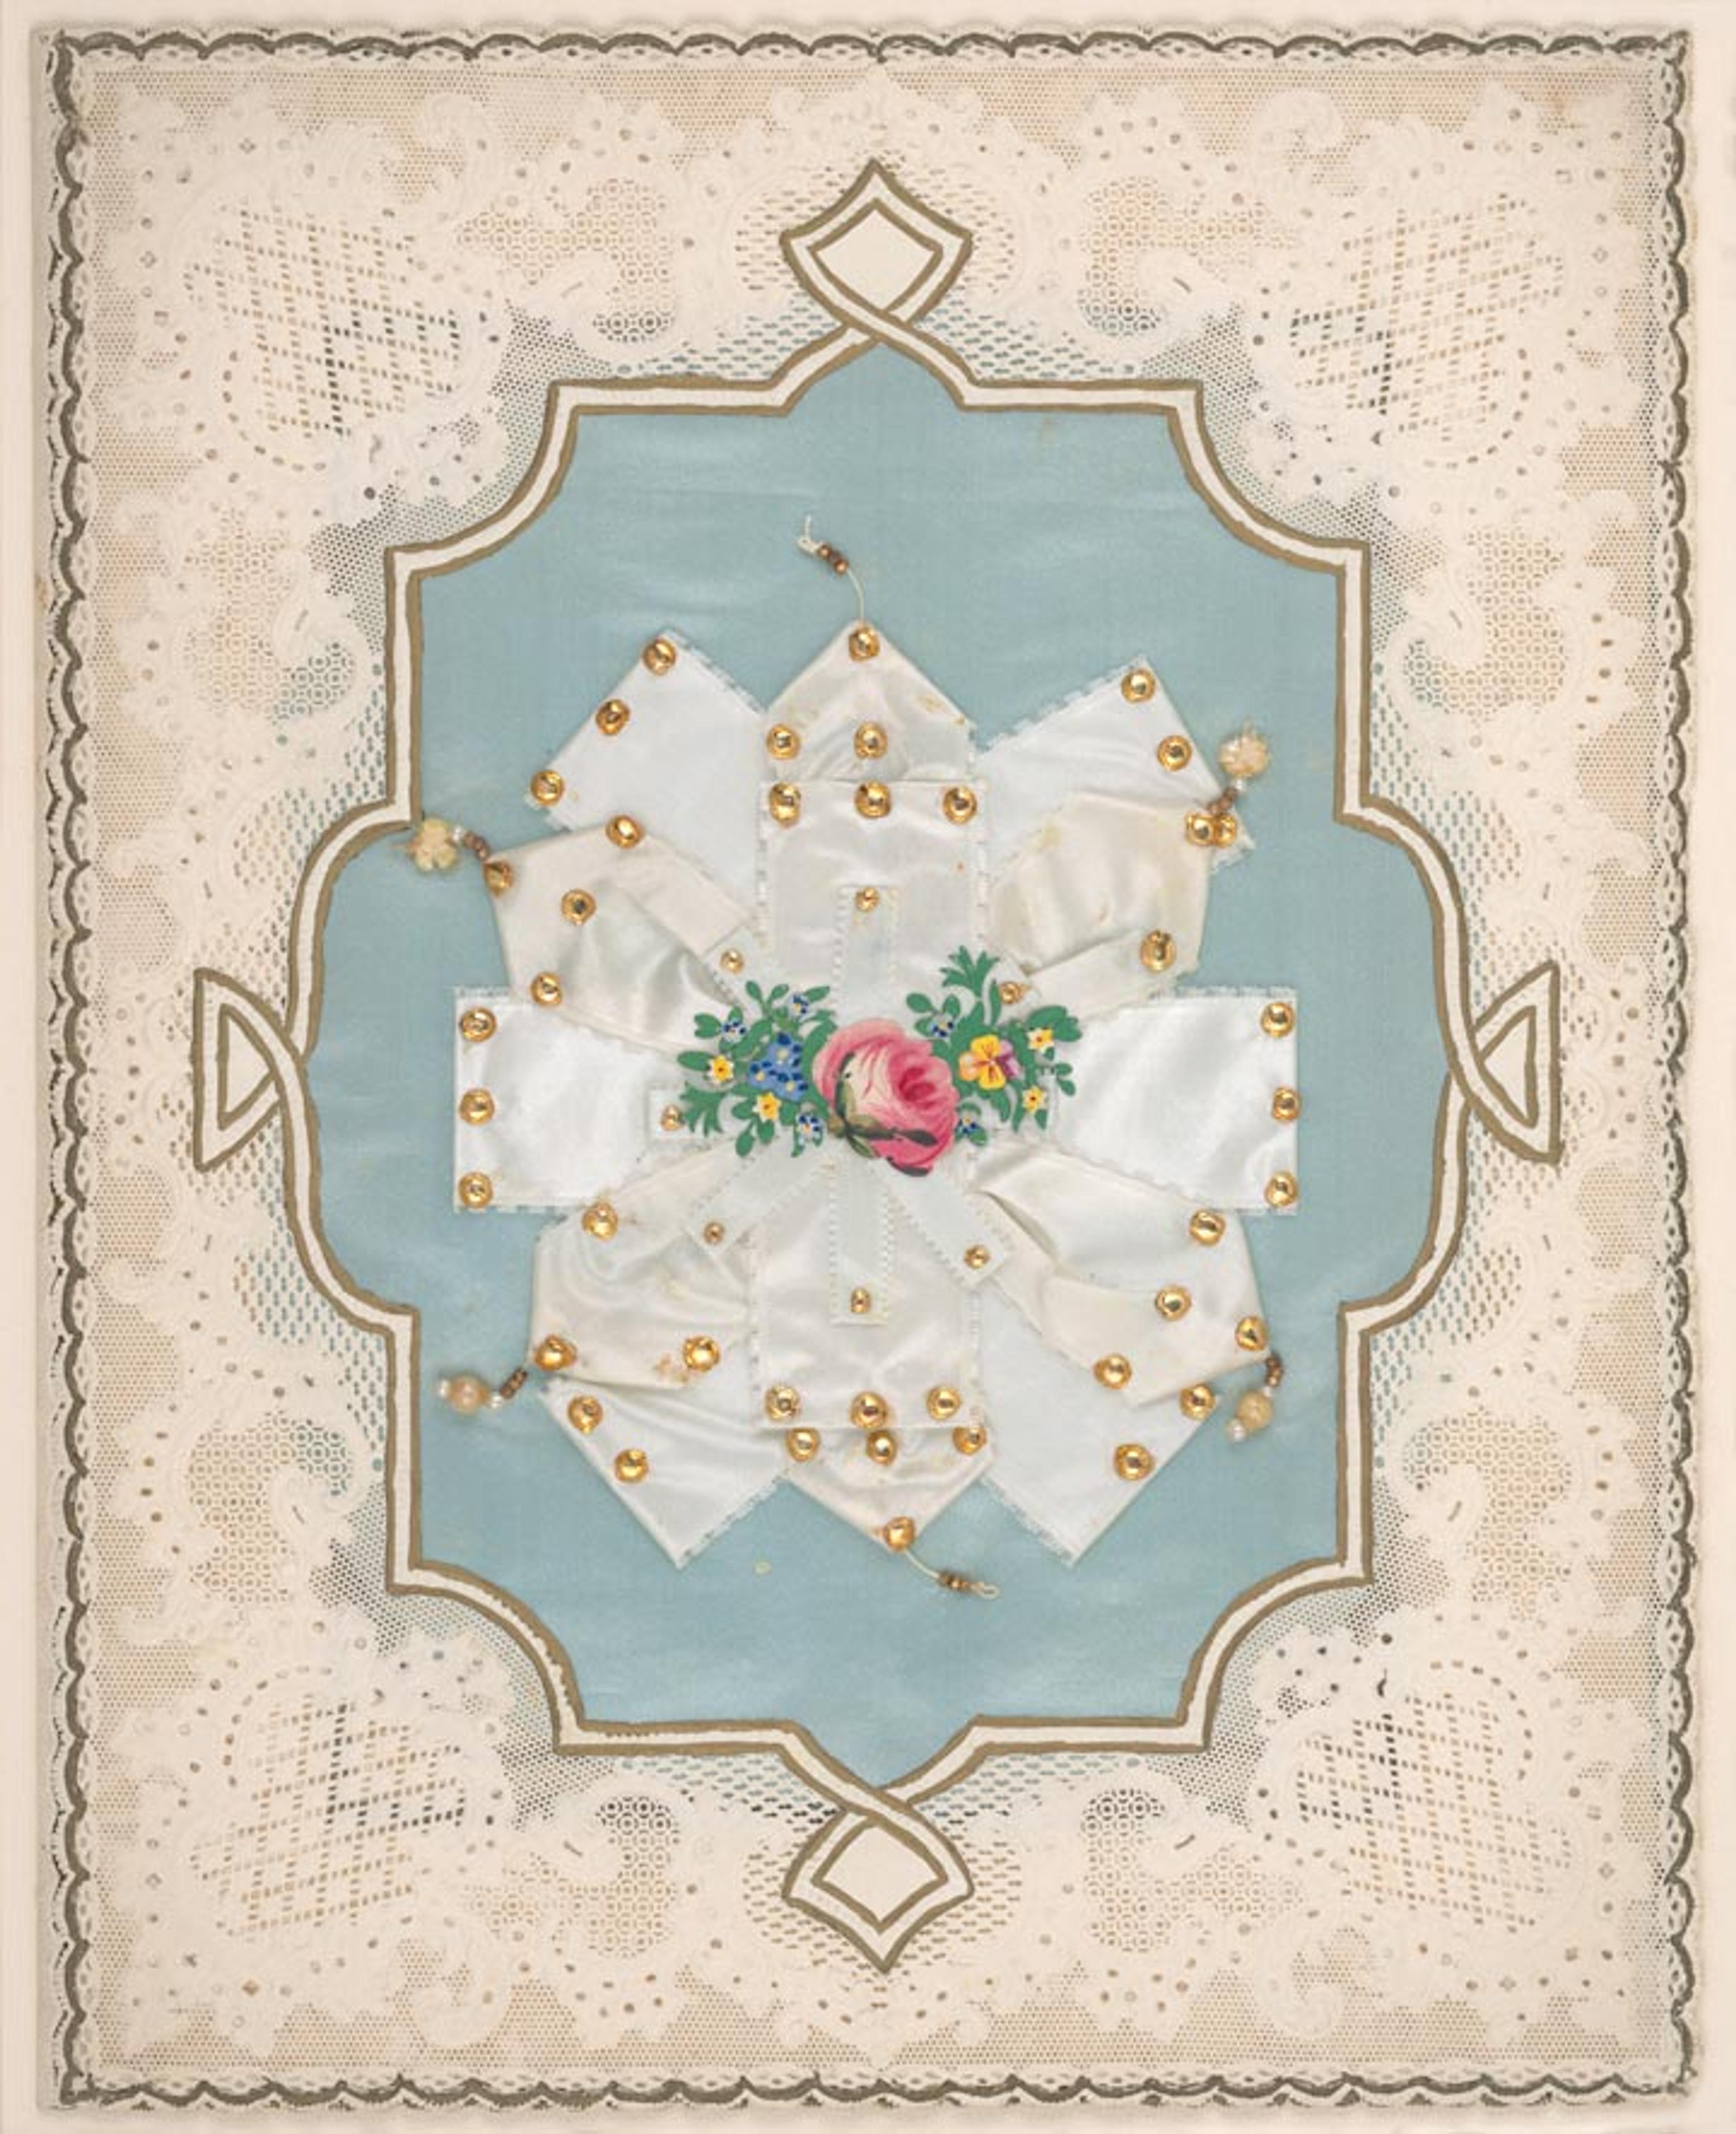 A 19th-century American lace-paper valentine with a blue-stain center adorned with faux pearls and a floral motif